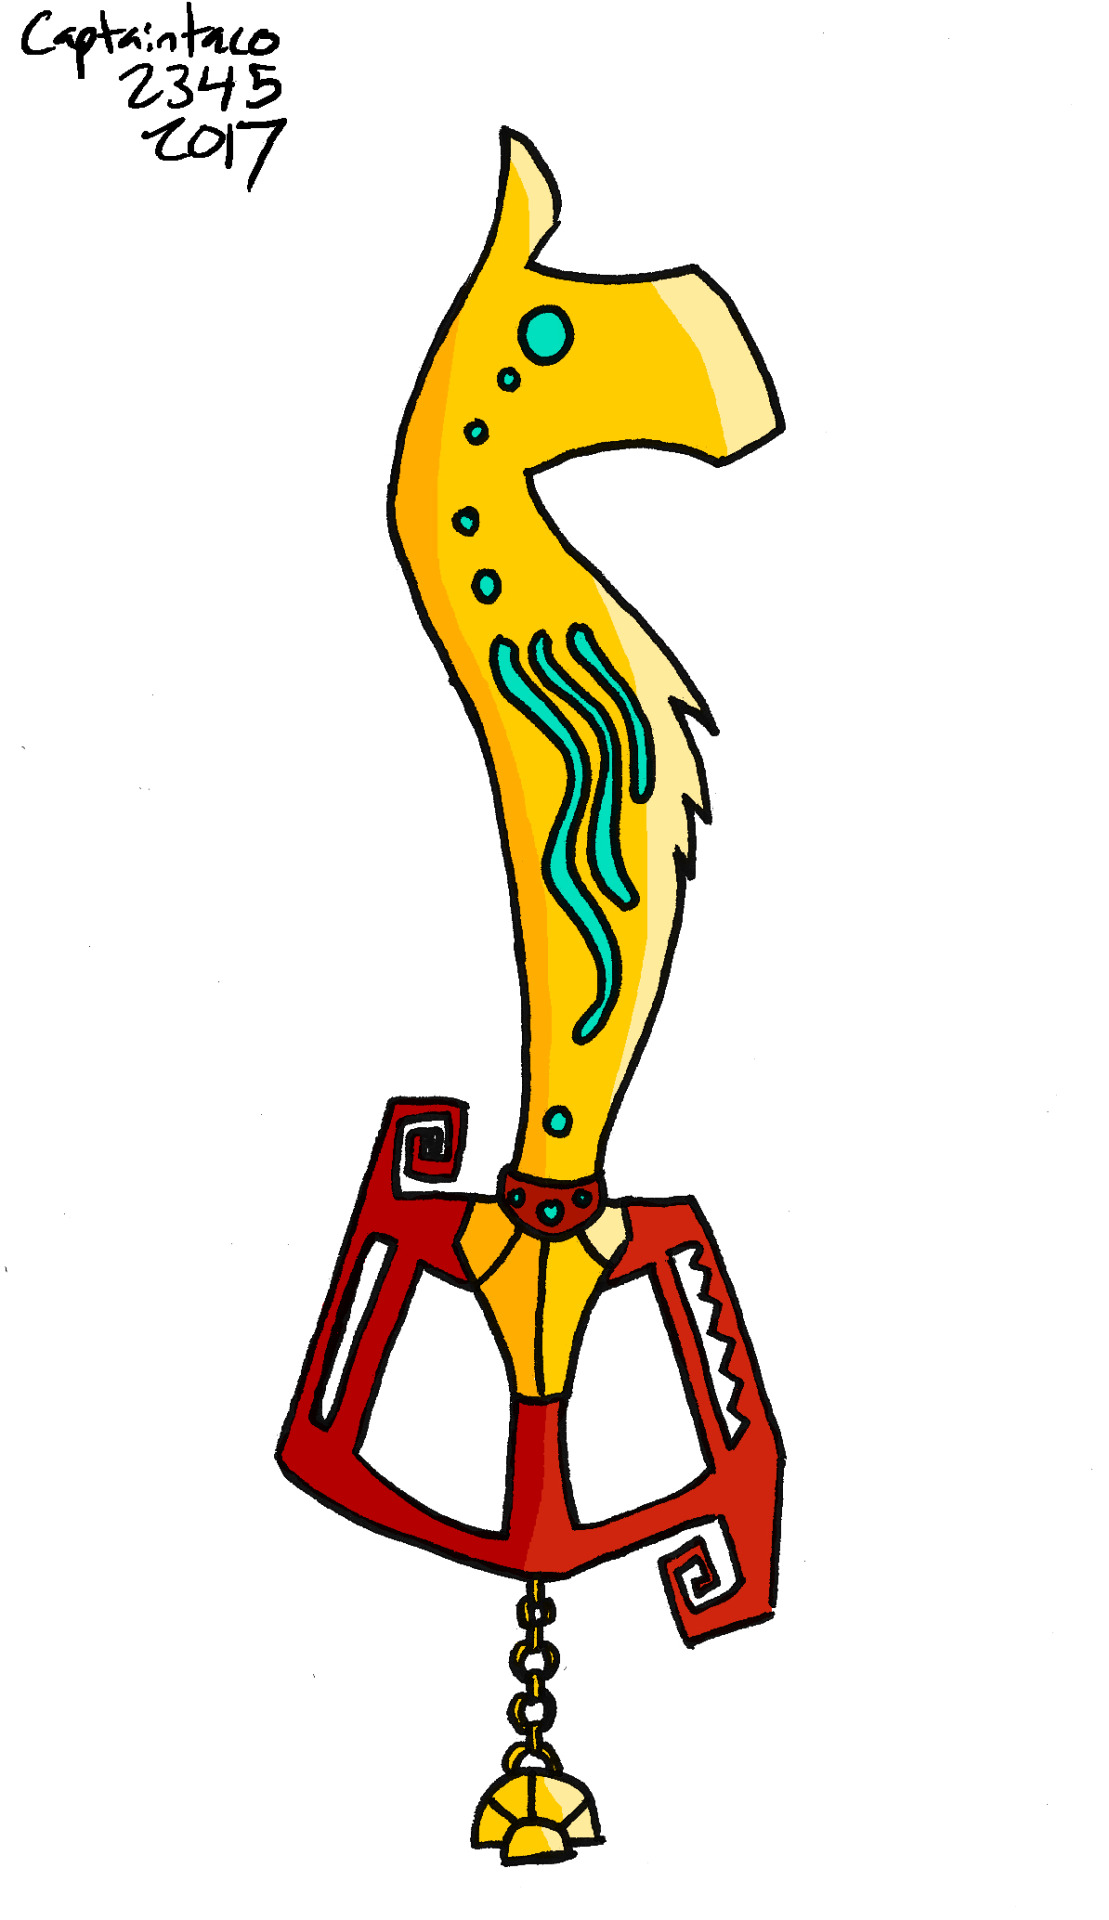 Another Keyblade design. This one is based on one of my favourite Disney movies,